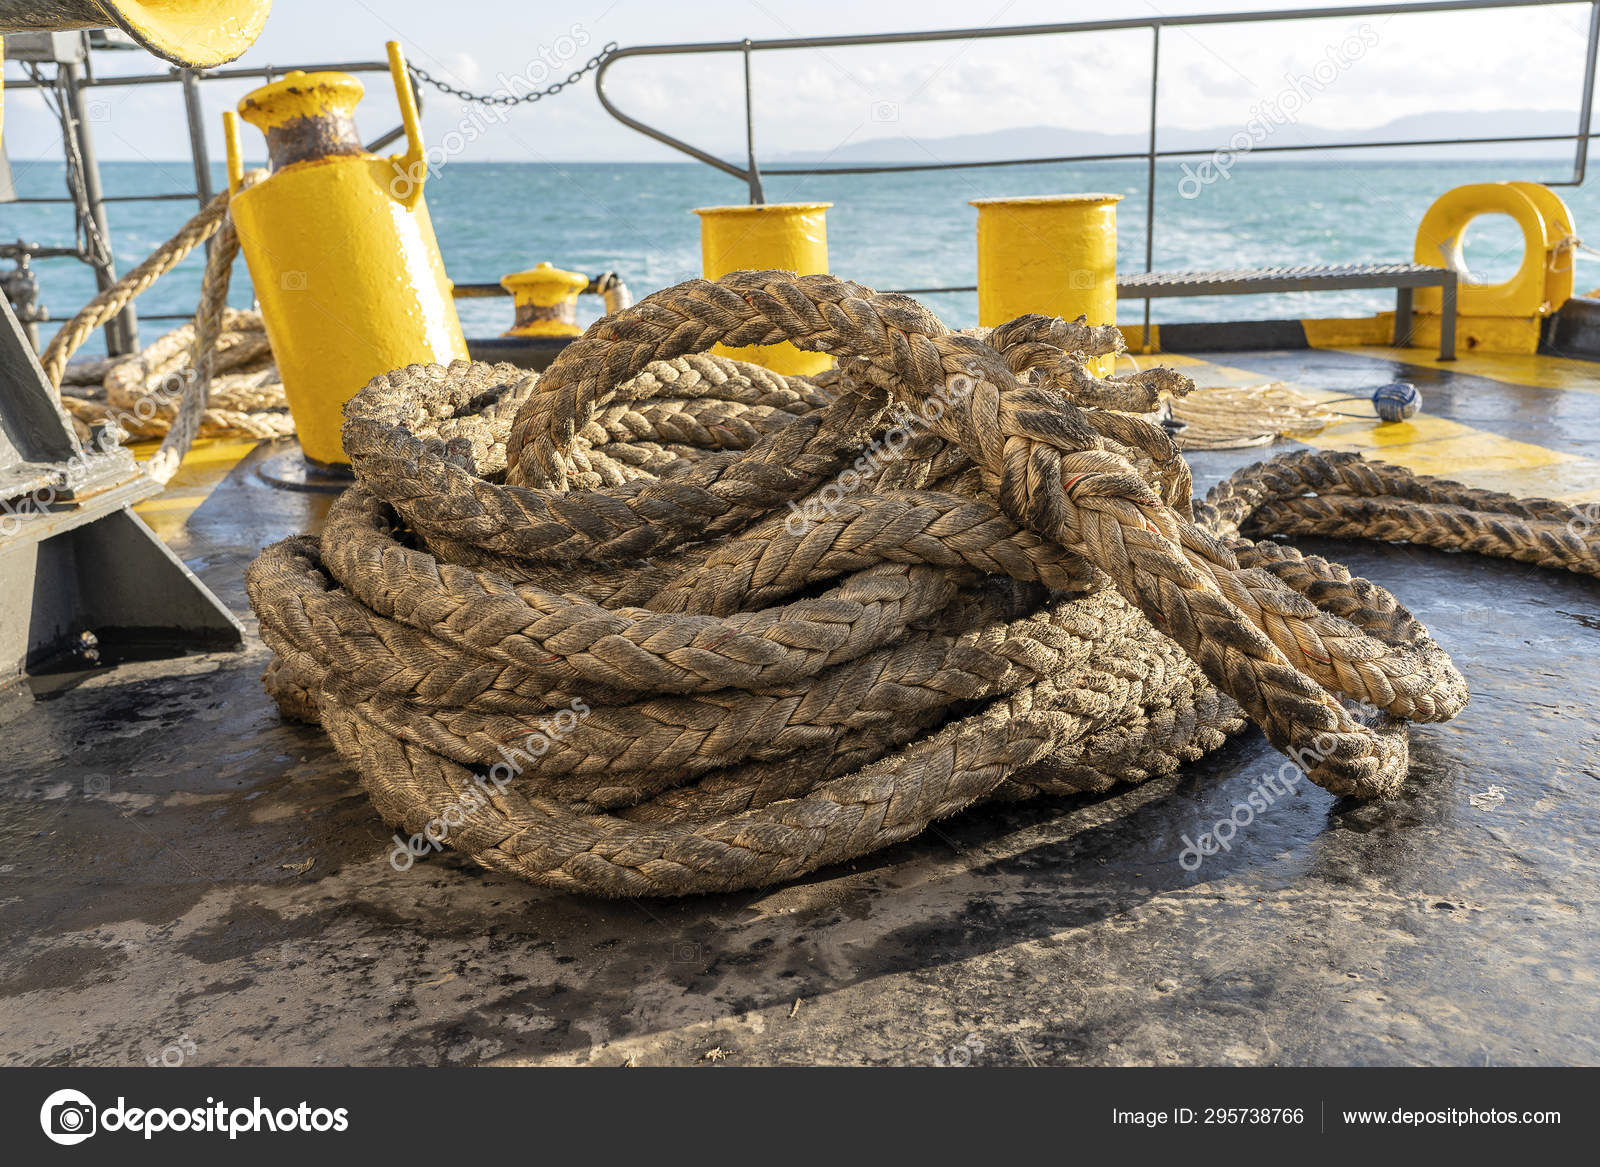 The deck of the ferry boat along with the a thick mooring rope and